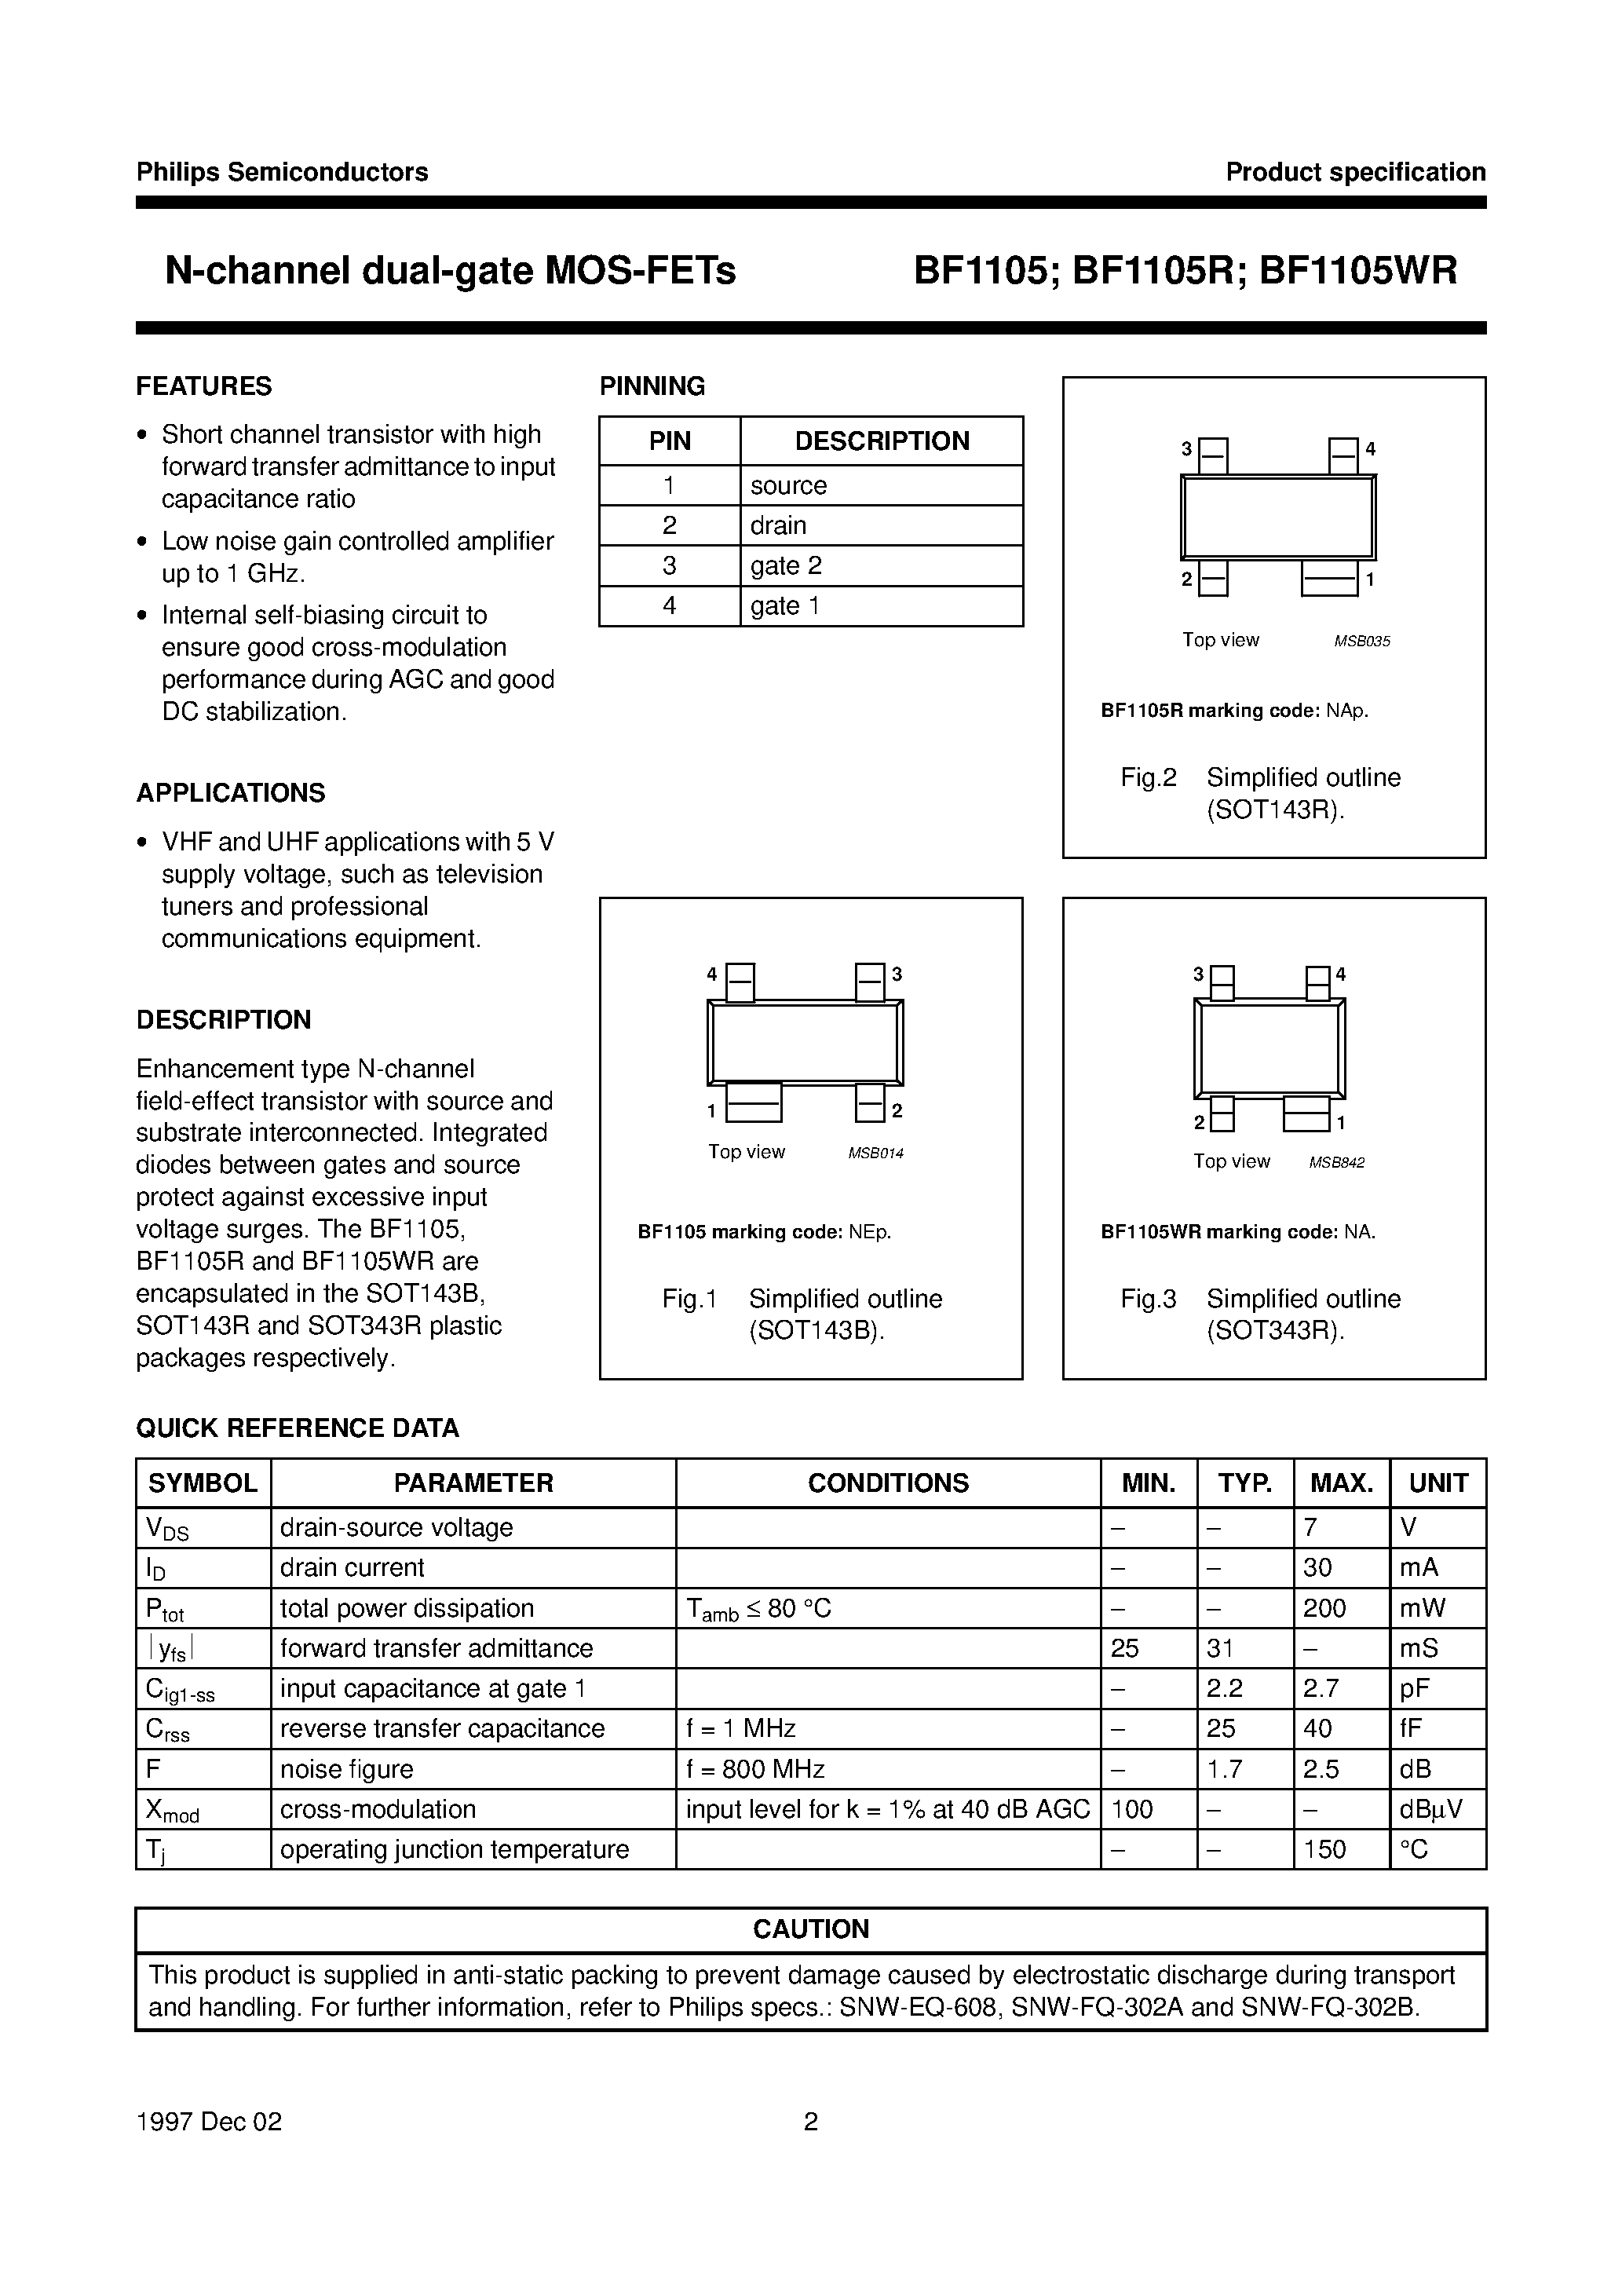 Datasheet BF1105WR - N-channel dual-gate MOS-FETs page 2